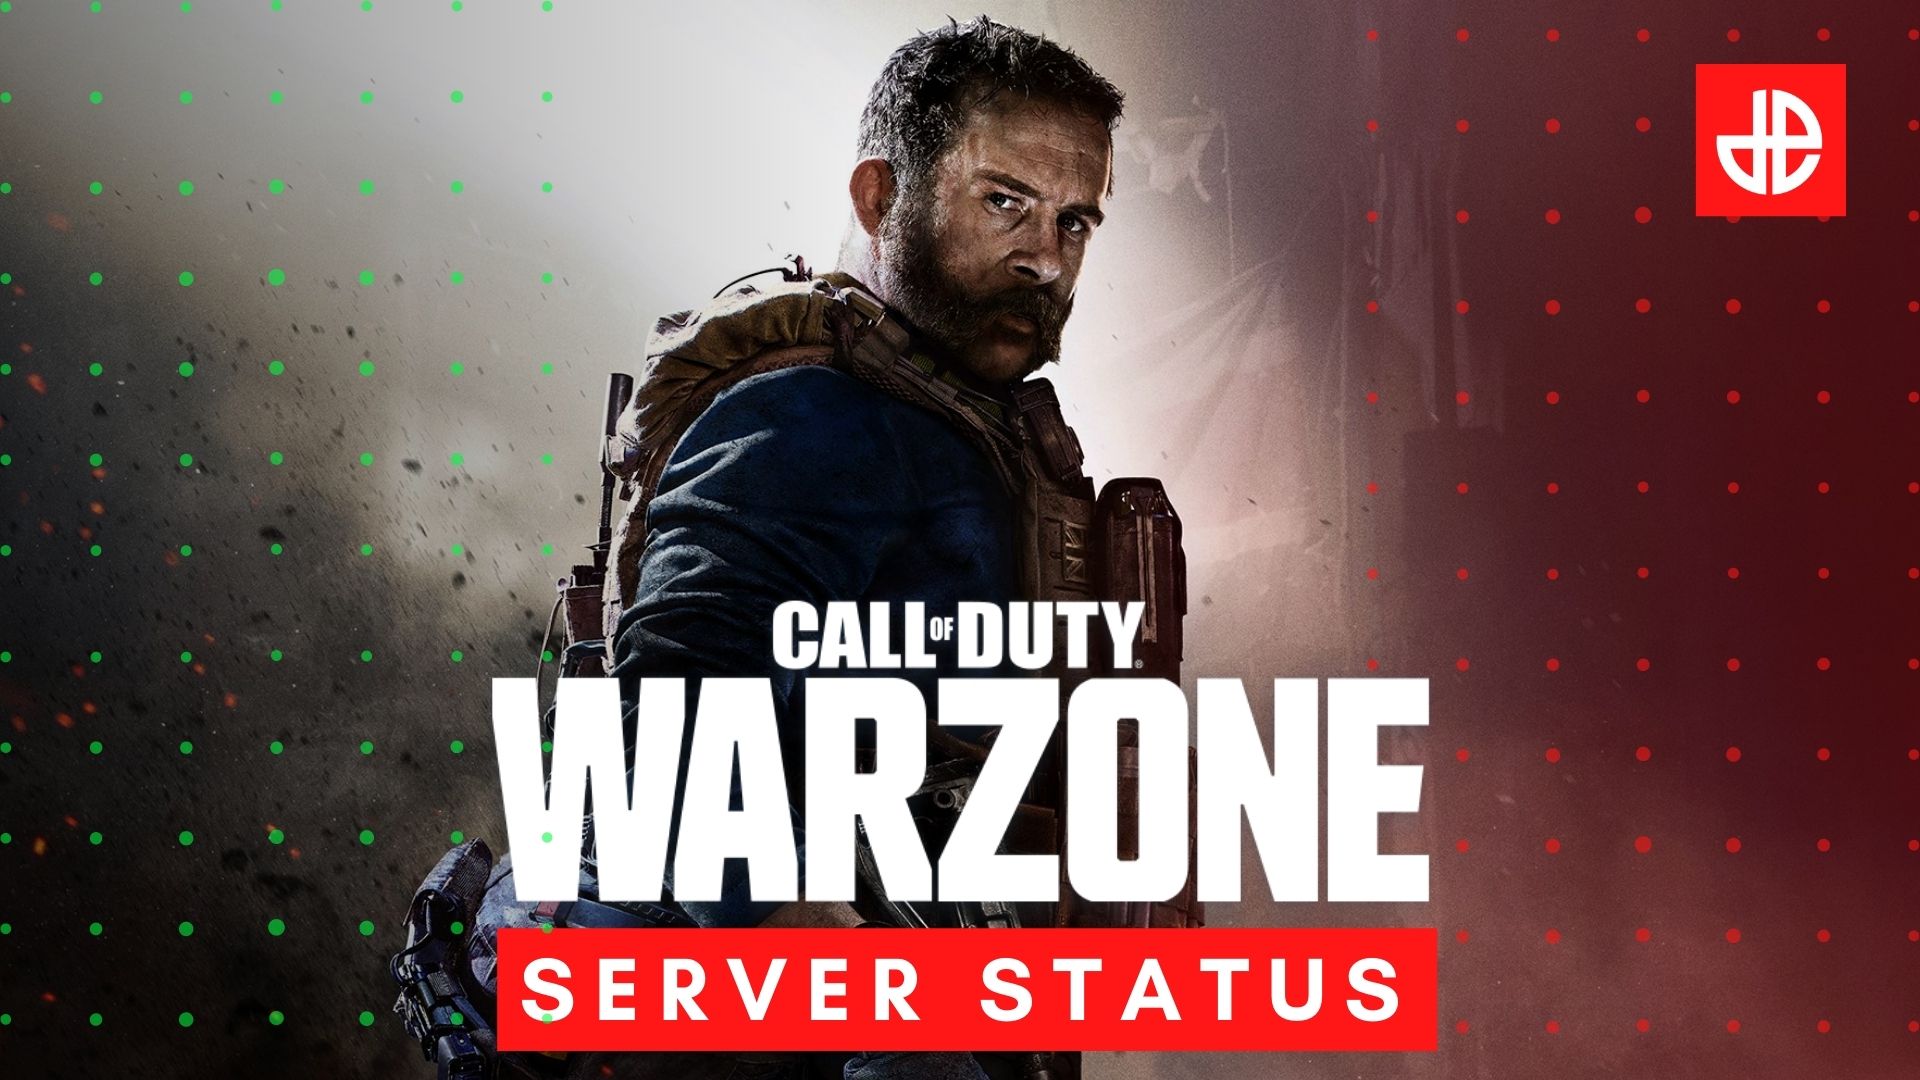 Warzone server status: Is Warzone down? Outages confirmed on August 16